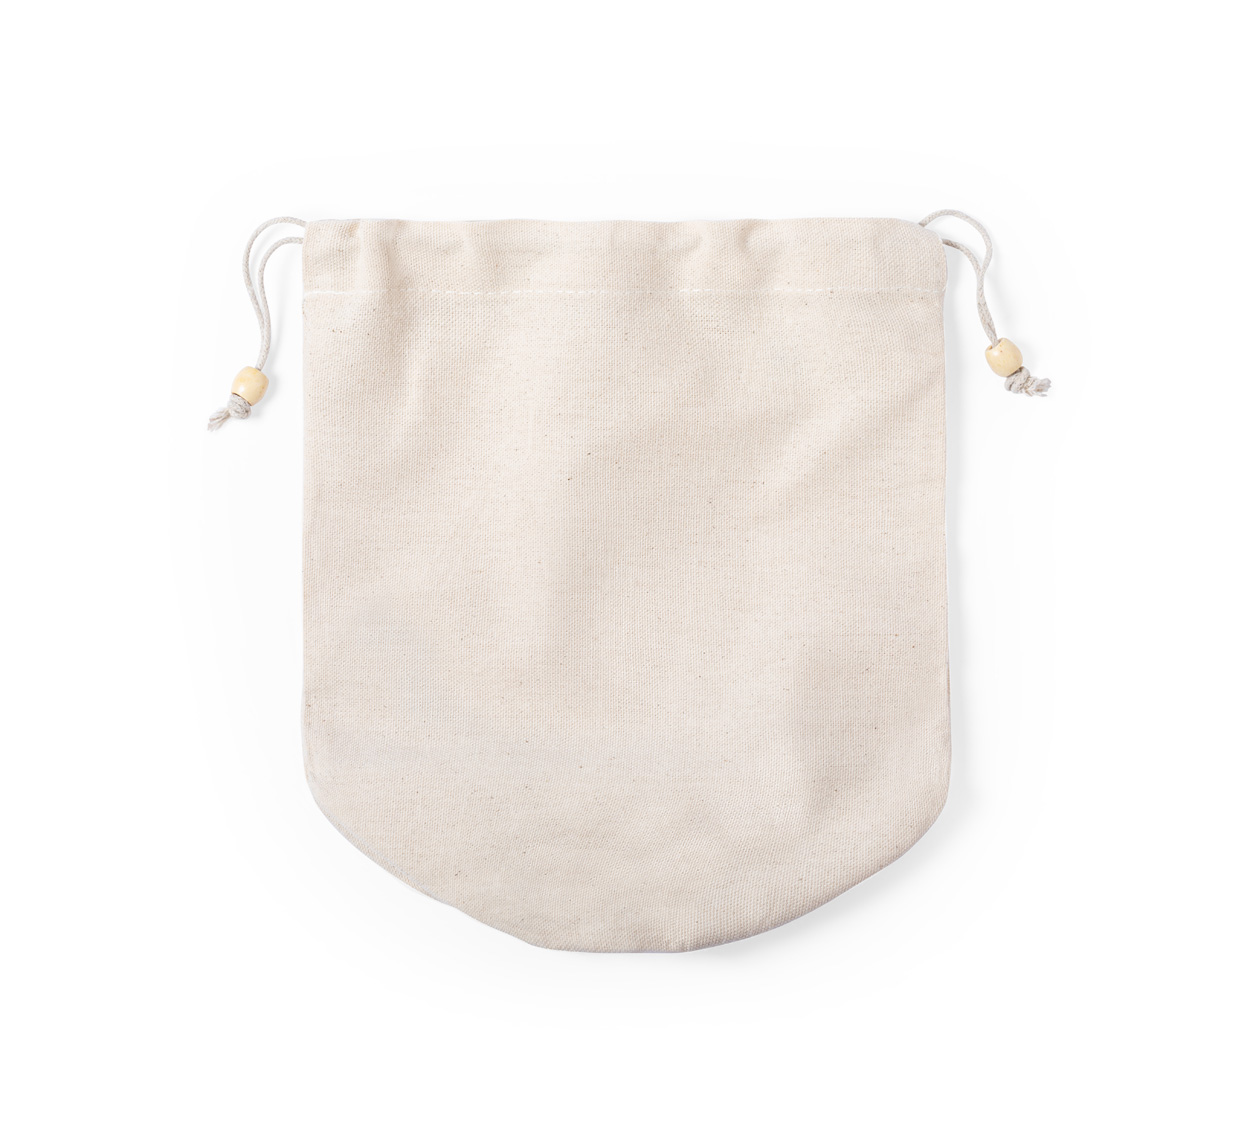 Talso cosmetic bag - beige